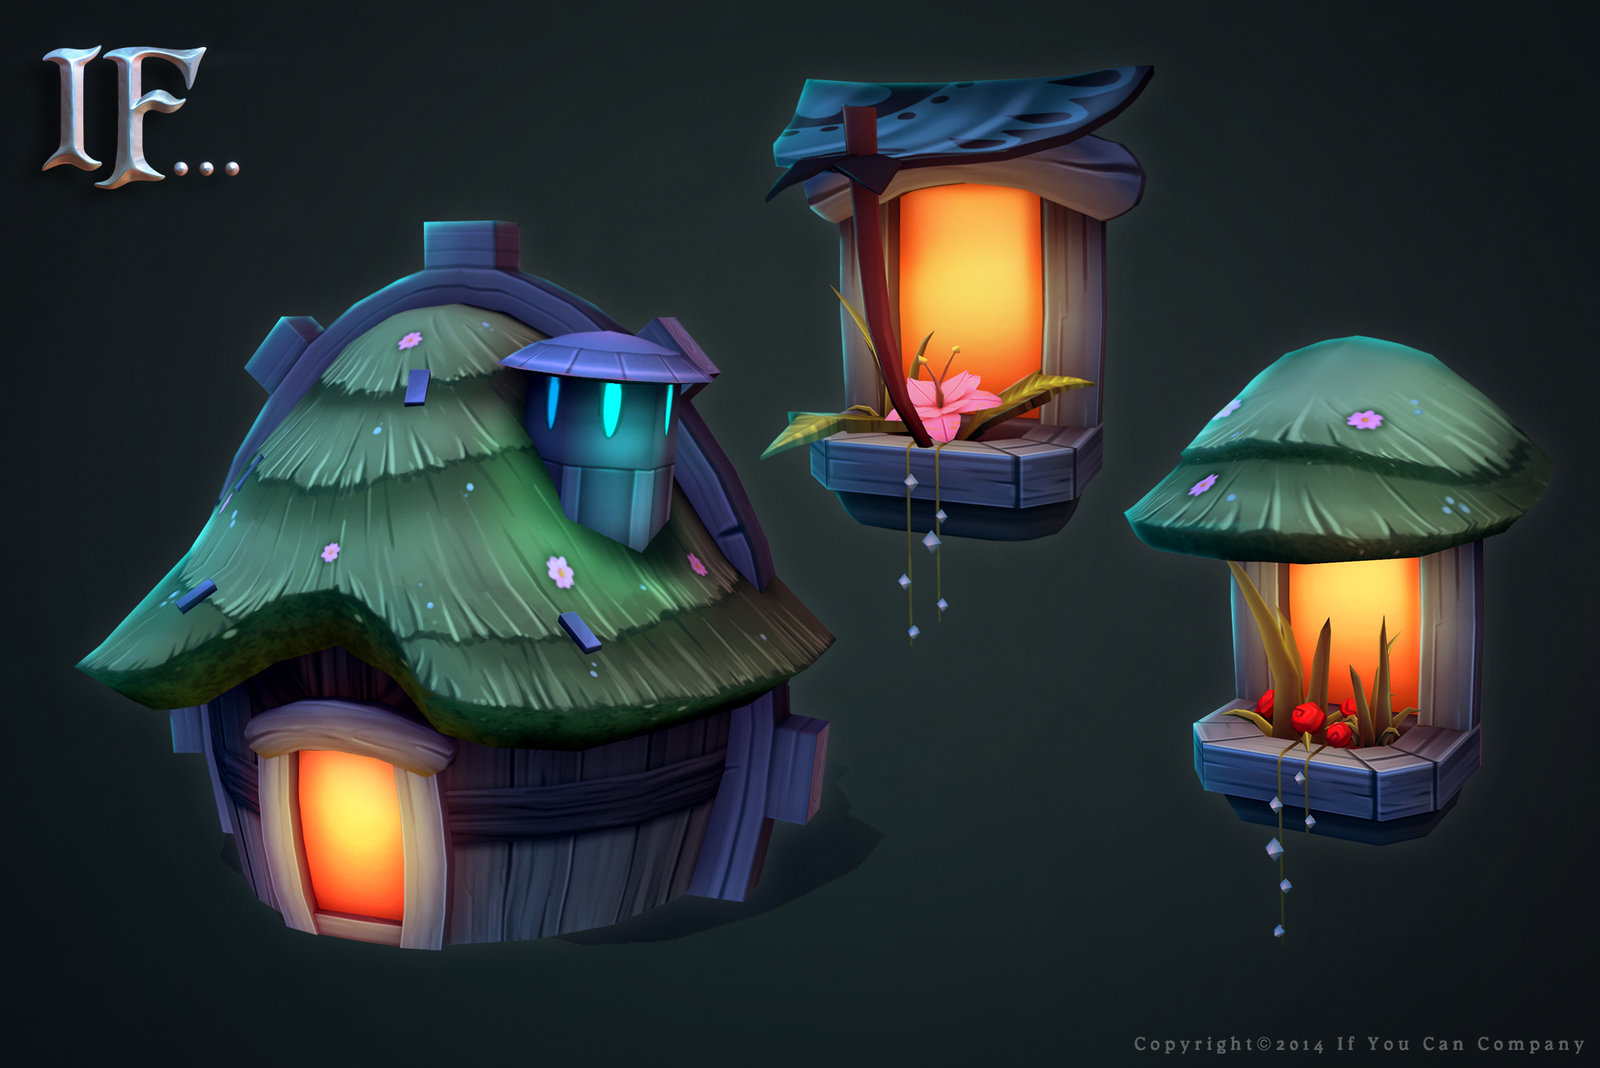 Imago houses and windows. Modeled and textured by me.